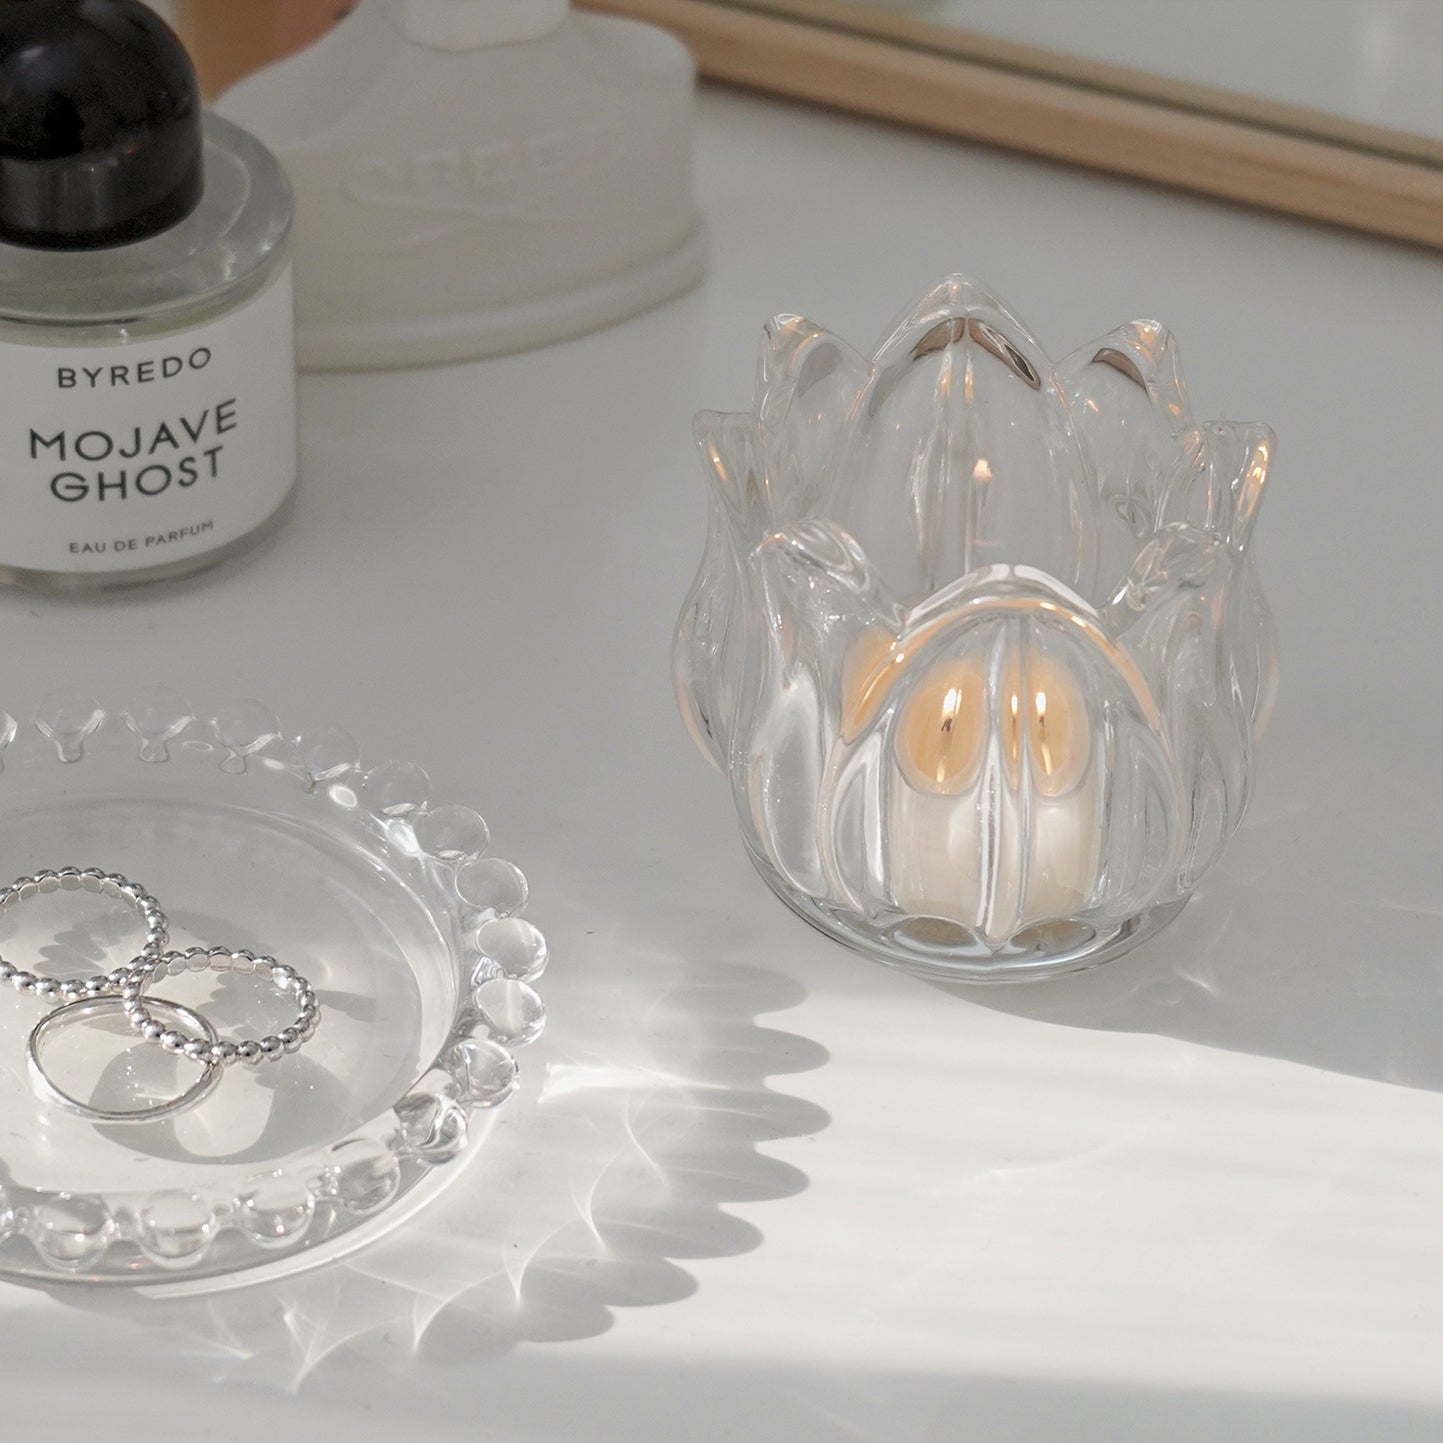 mini beaded clear round tray with silver rings and a lit tealight candle in a tulip flower shape glass tealight candle holders on vanity table with byredo, creed, and tom ford perfumes